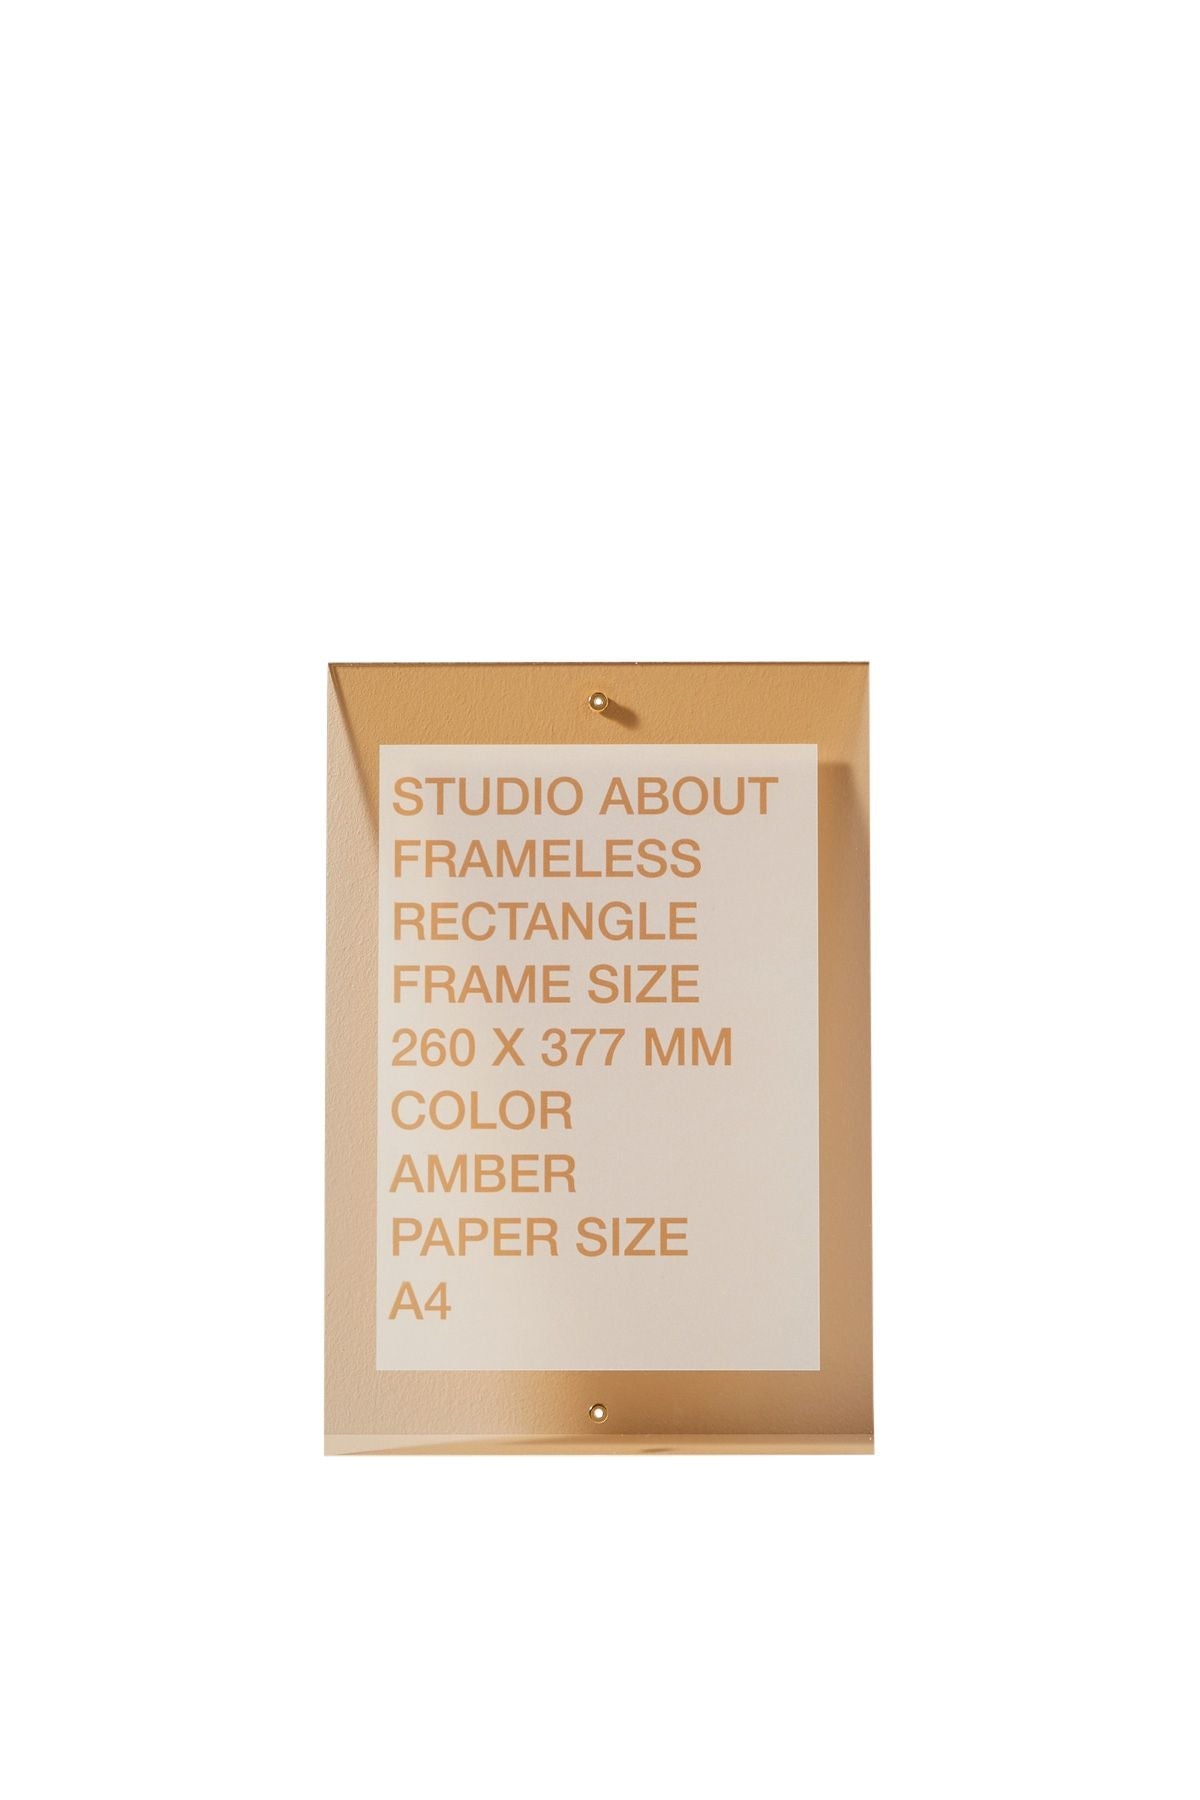 Studio About Frameless Frame A4 Rectangle, Amber